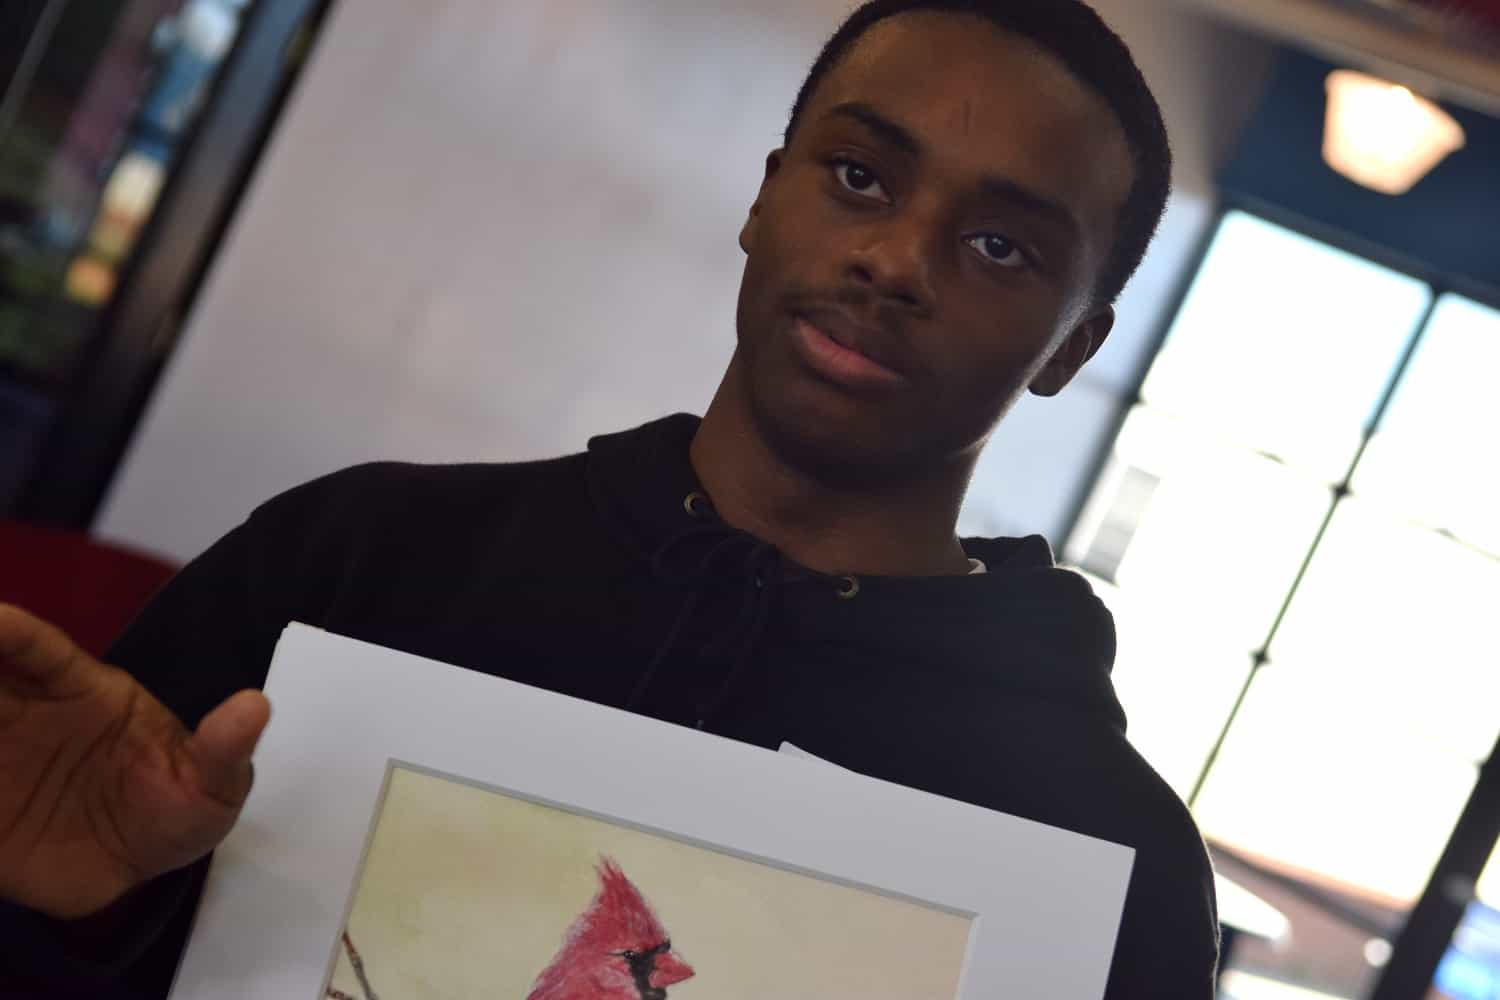 Bobby HIll won an honorable mention in the Congressional Art Competition. "I'm a busy person," he says to Forte-Brown.